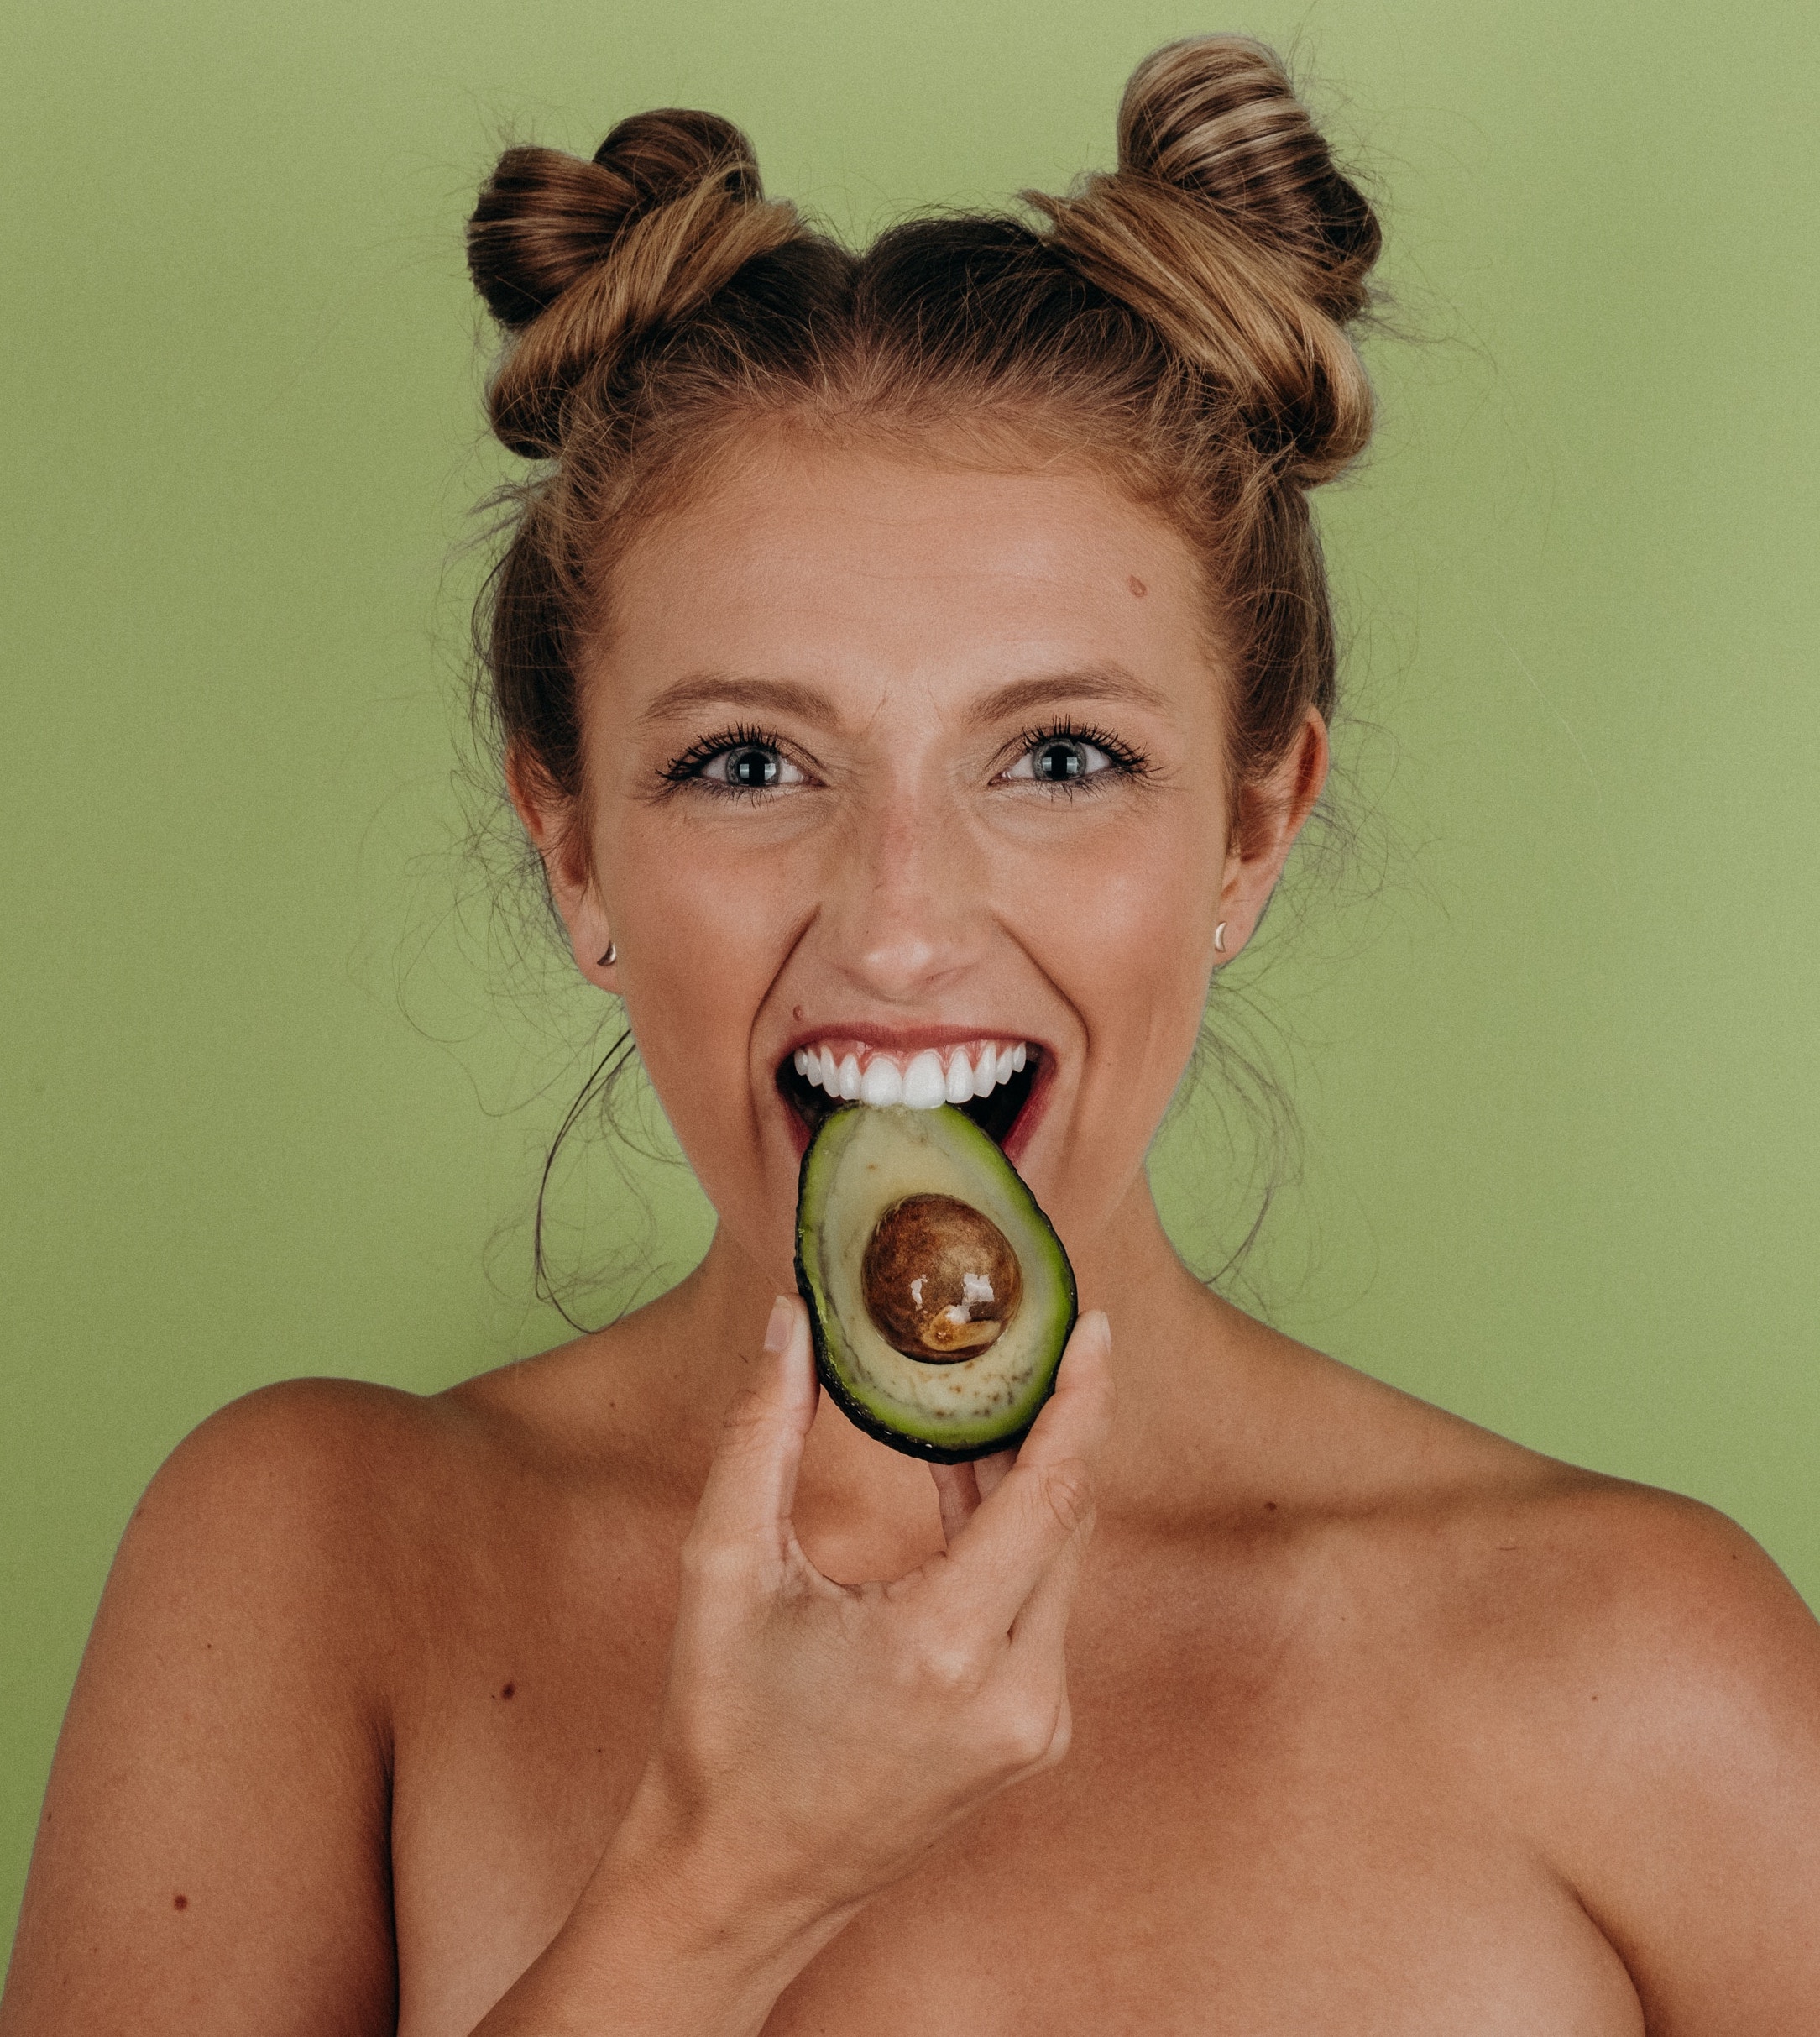 What fruits and veggies to eat for great skin